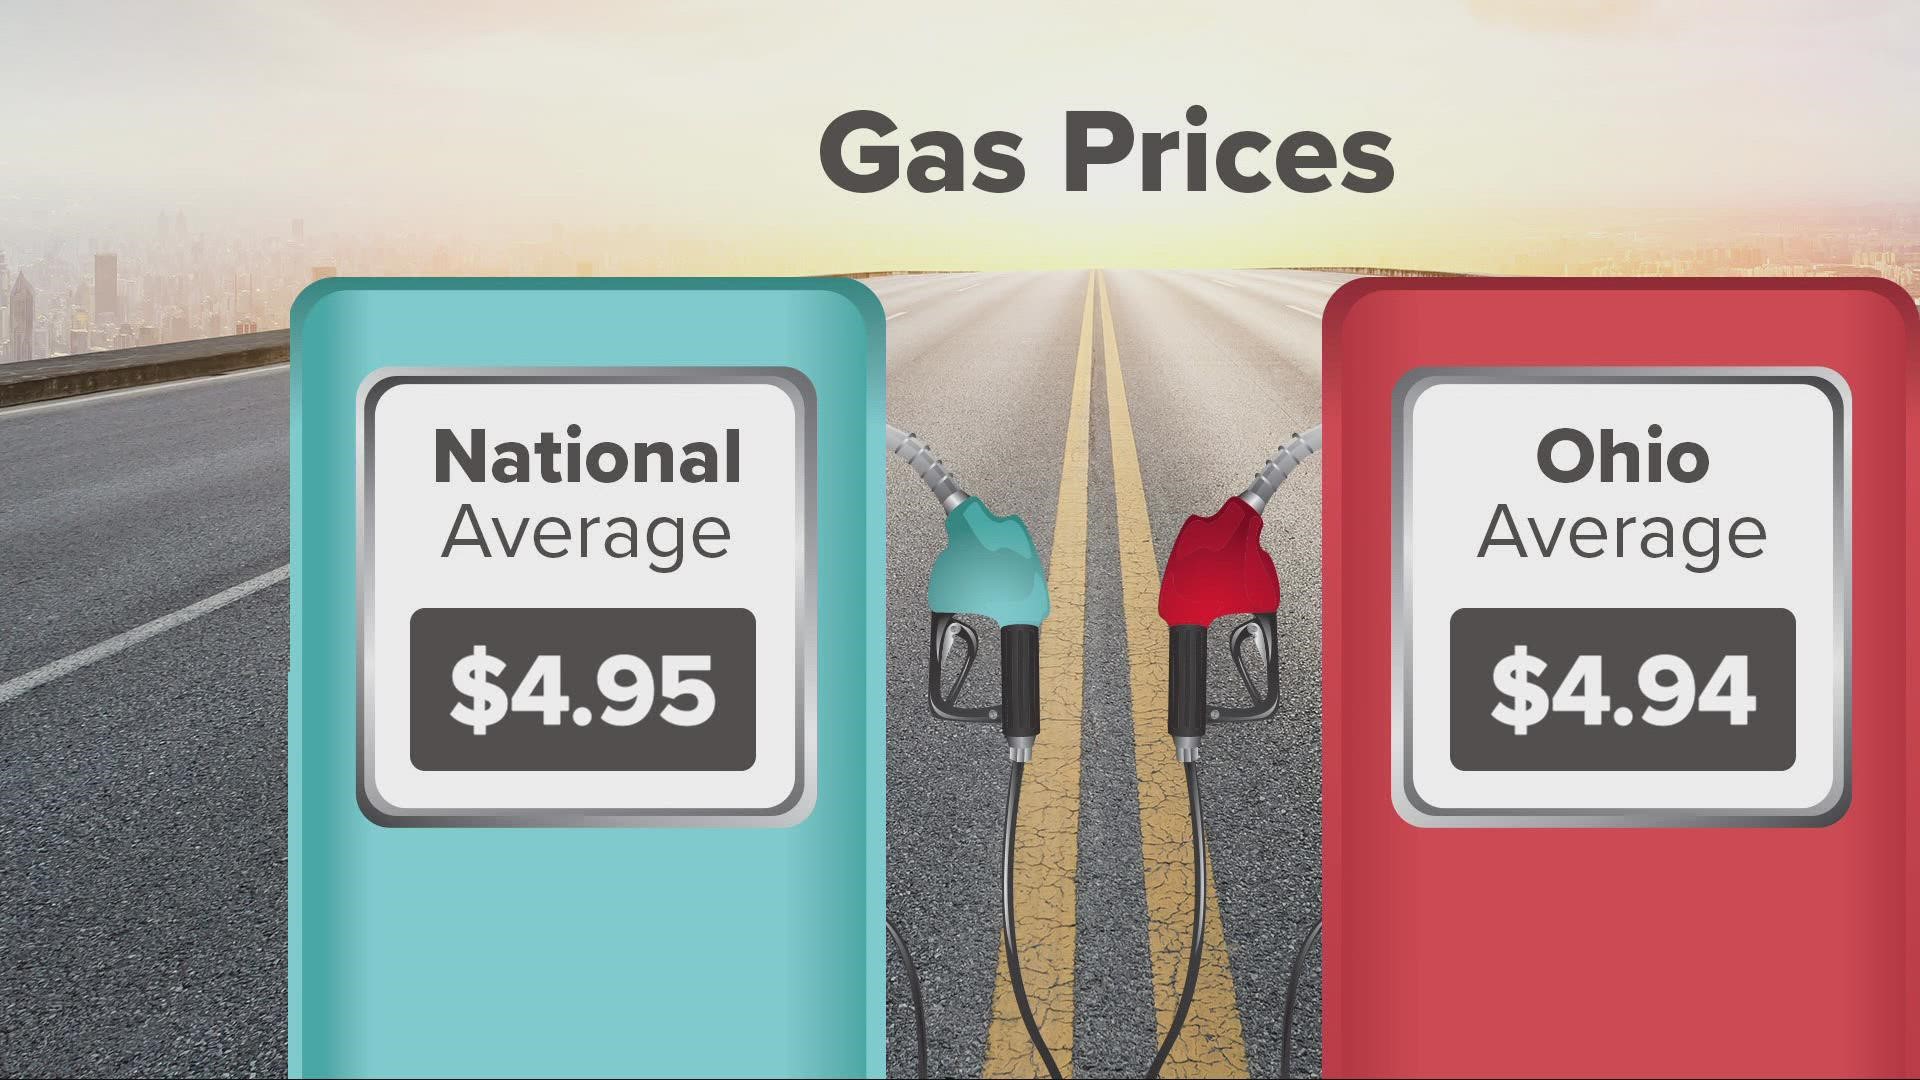 With gas prices still hovering near record highs—many people are looking for new ways to save. But is getting a gas credit card or joining a warehouse club worth it?